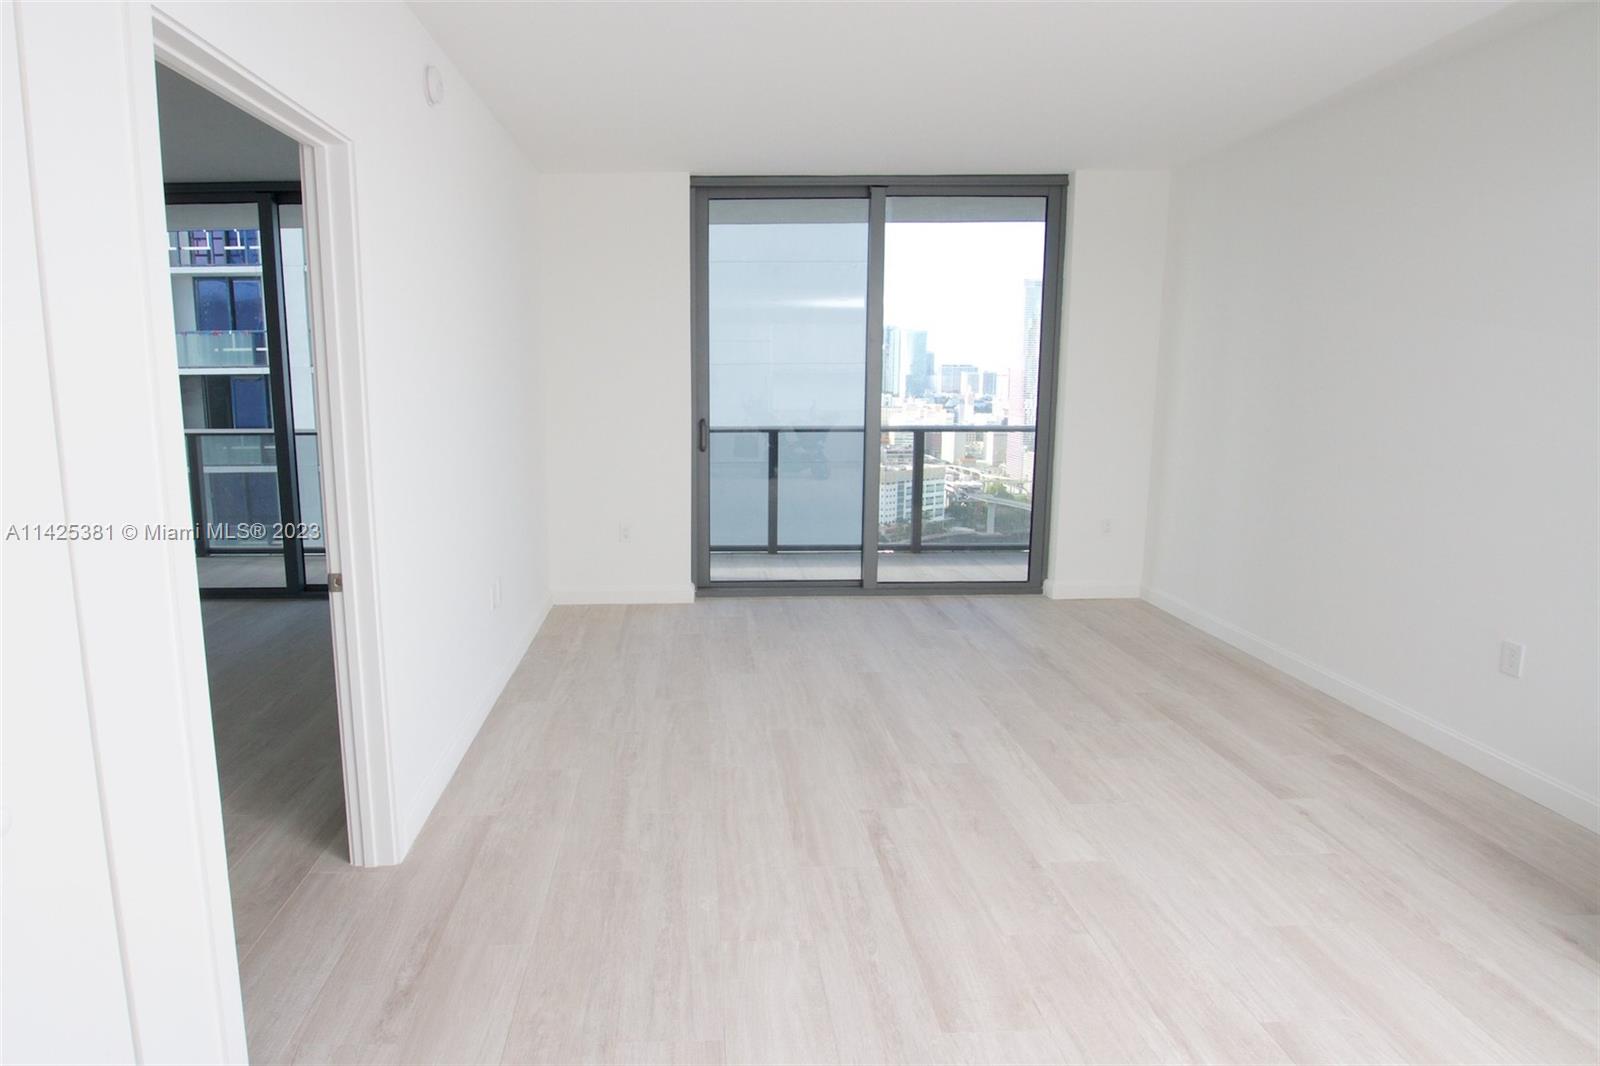 Photo 2 of Brickell Heights W Apt 3310 in Miami - MLS A11425381